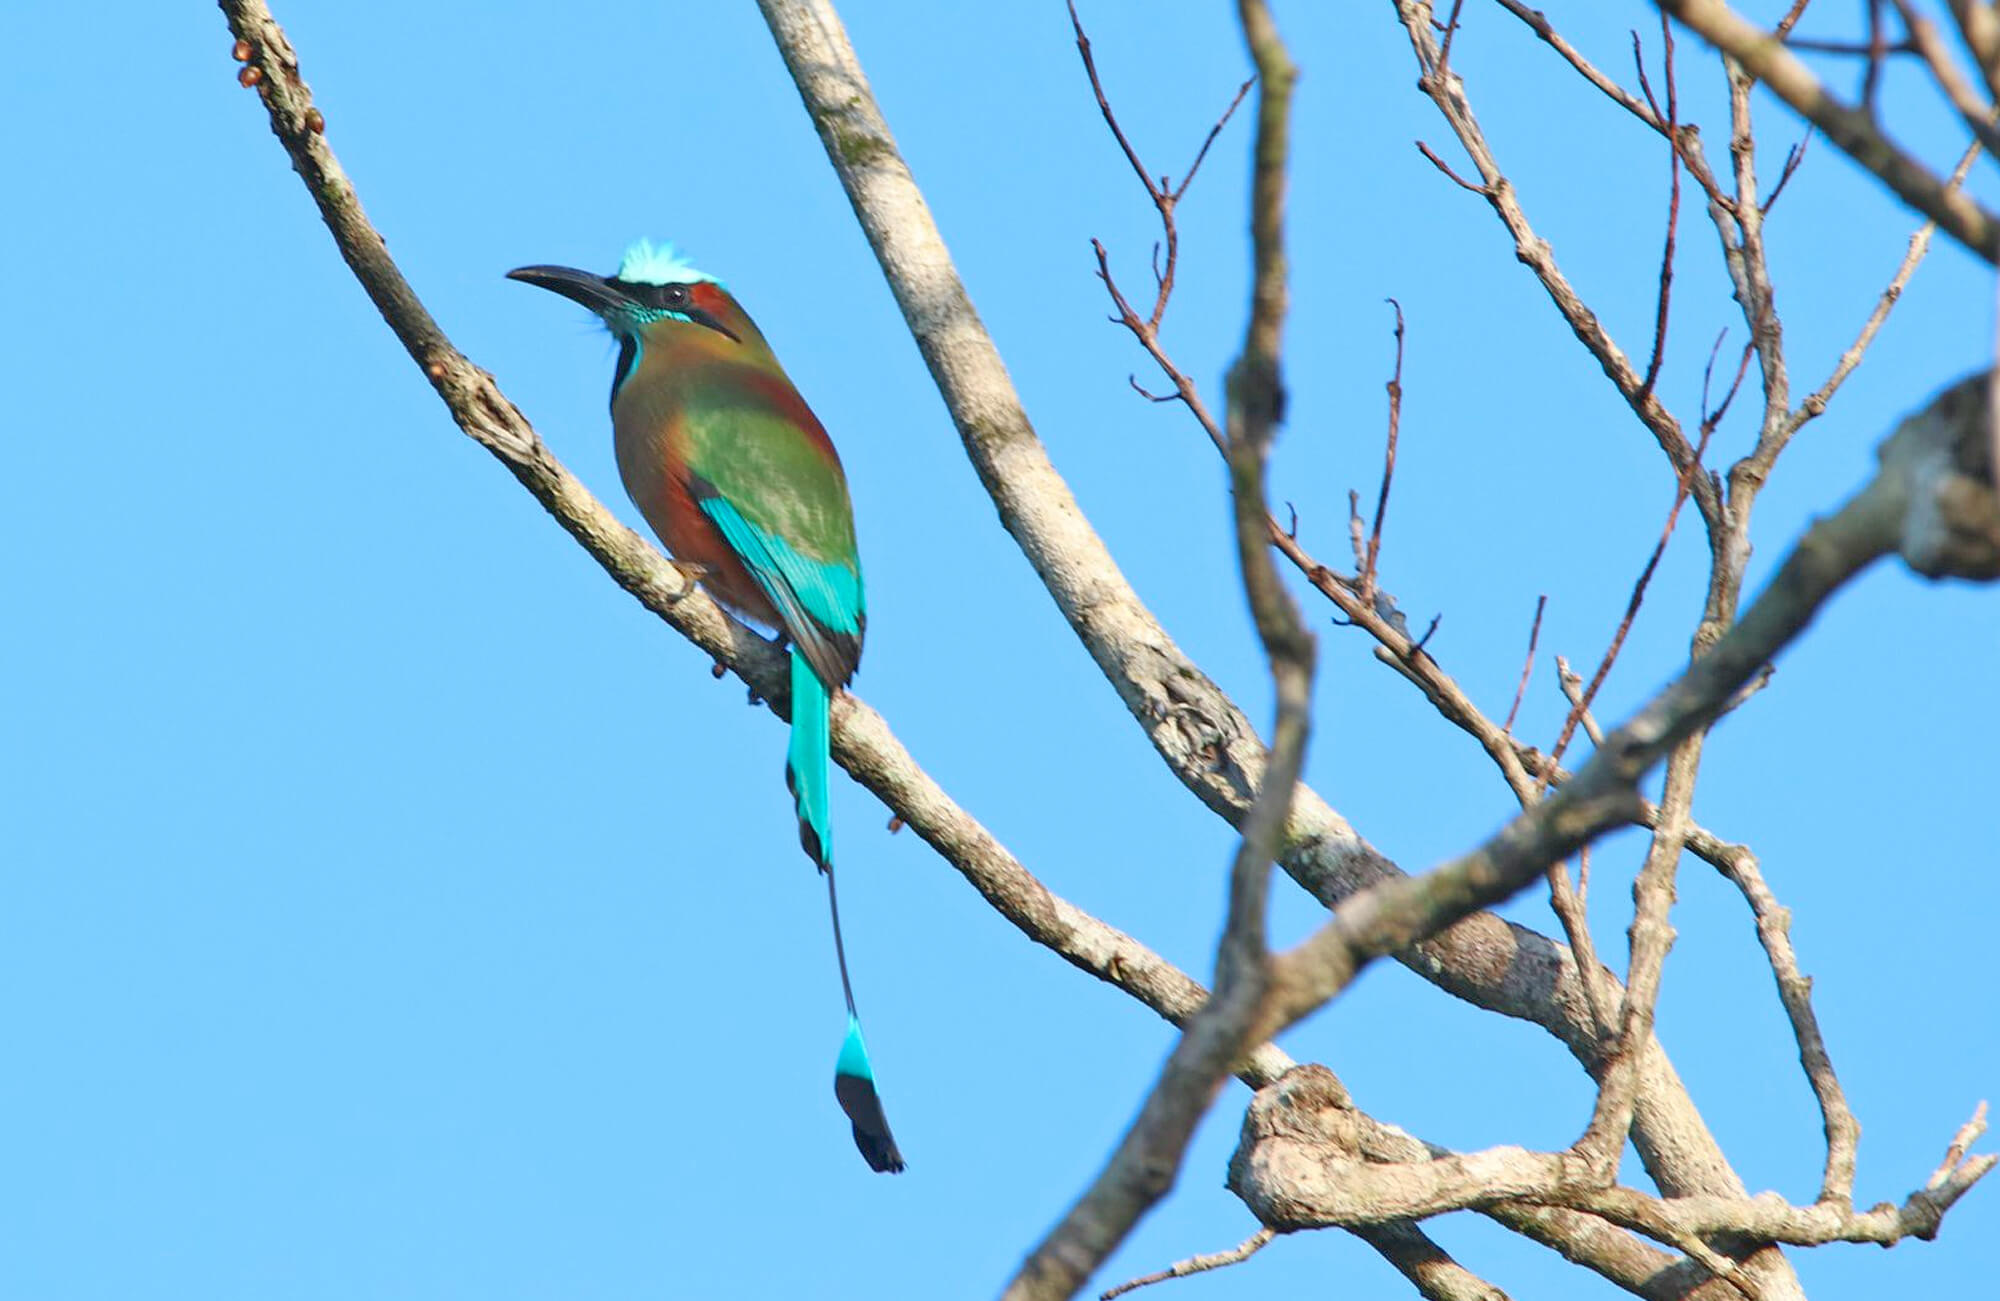 Turquoise-browed Motmot | Mexico: The Yucatán and Cozumel